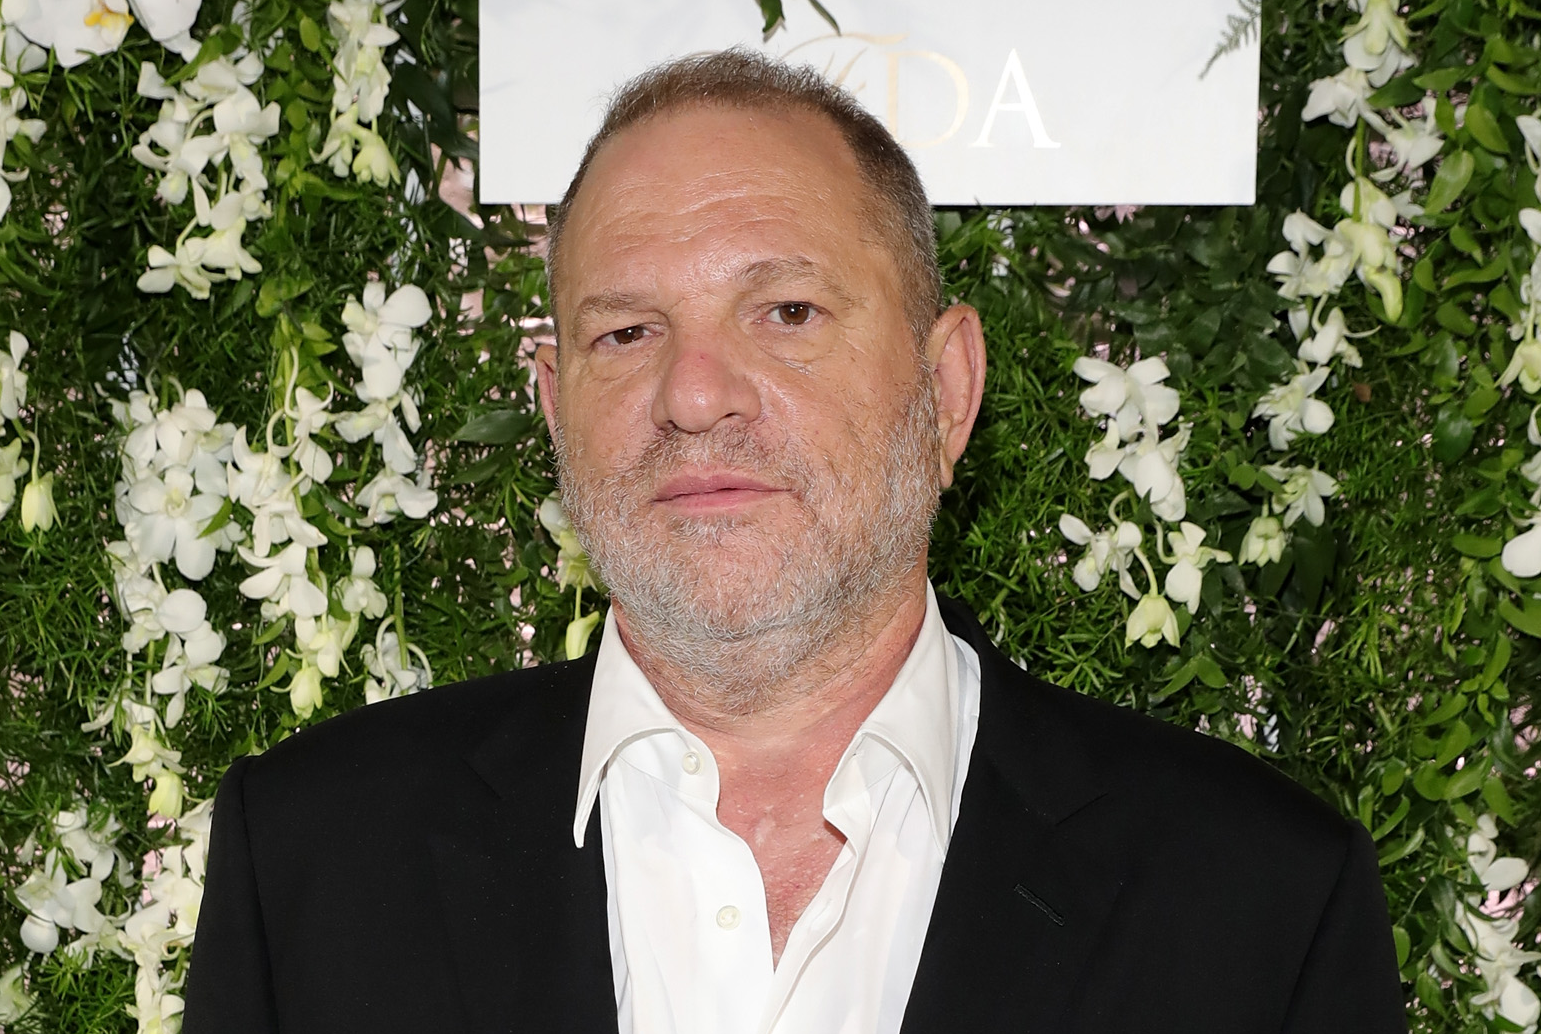 In the wake of a New York Times story containing multiple allegations of sexual harassment against movie producer and executive Harvey Weinstein, at least three Democratic senators are donating campaign contributions from Weinstein to charity, BuzzFeed News has learned.